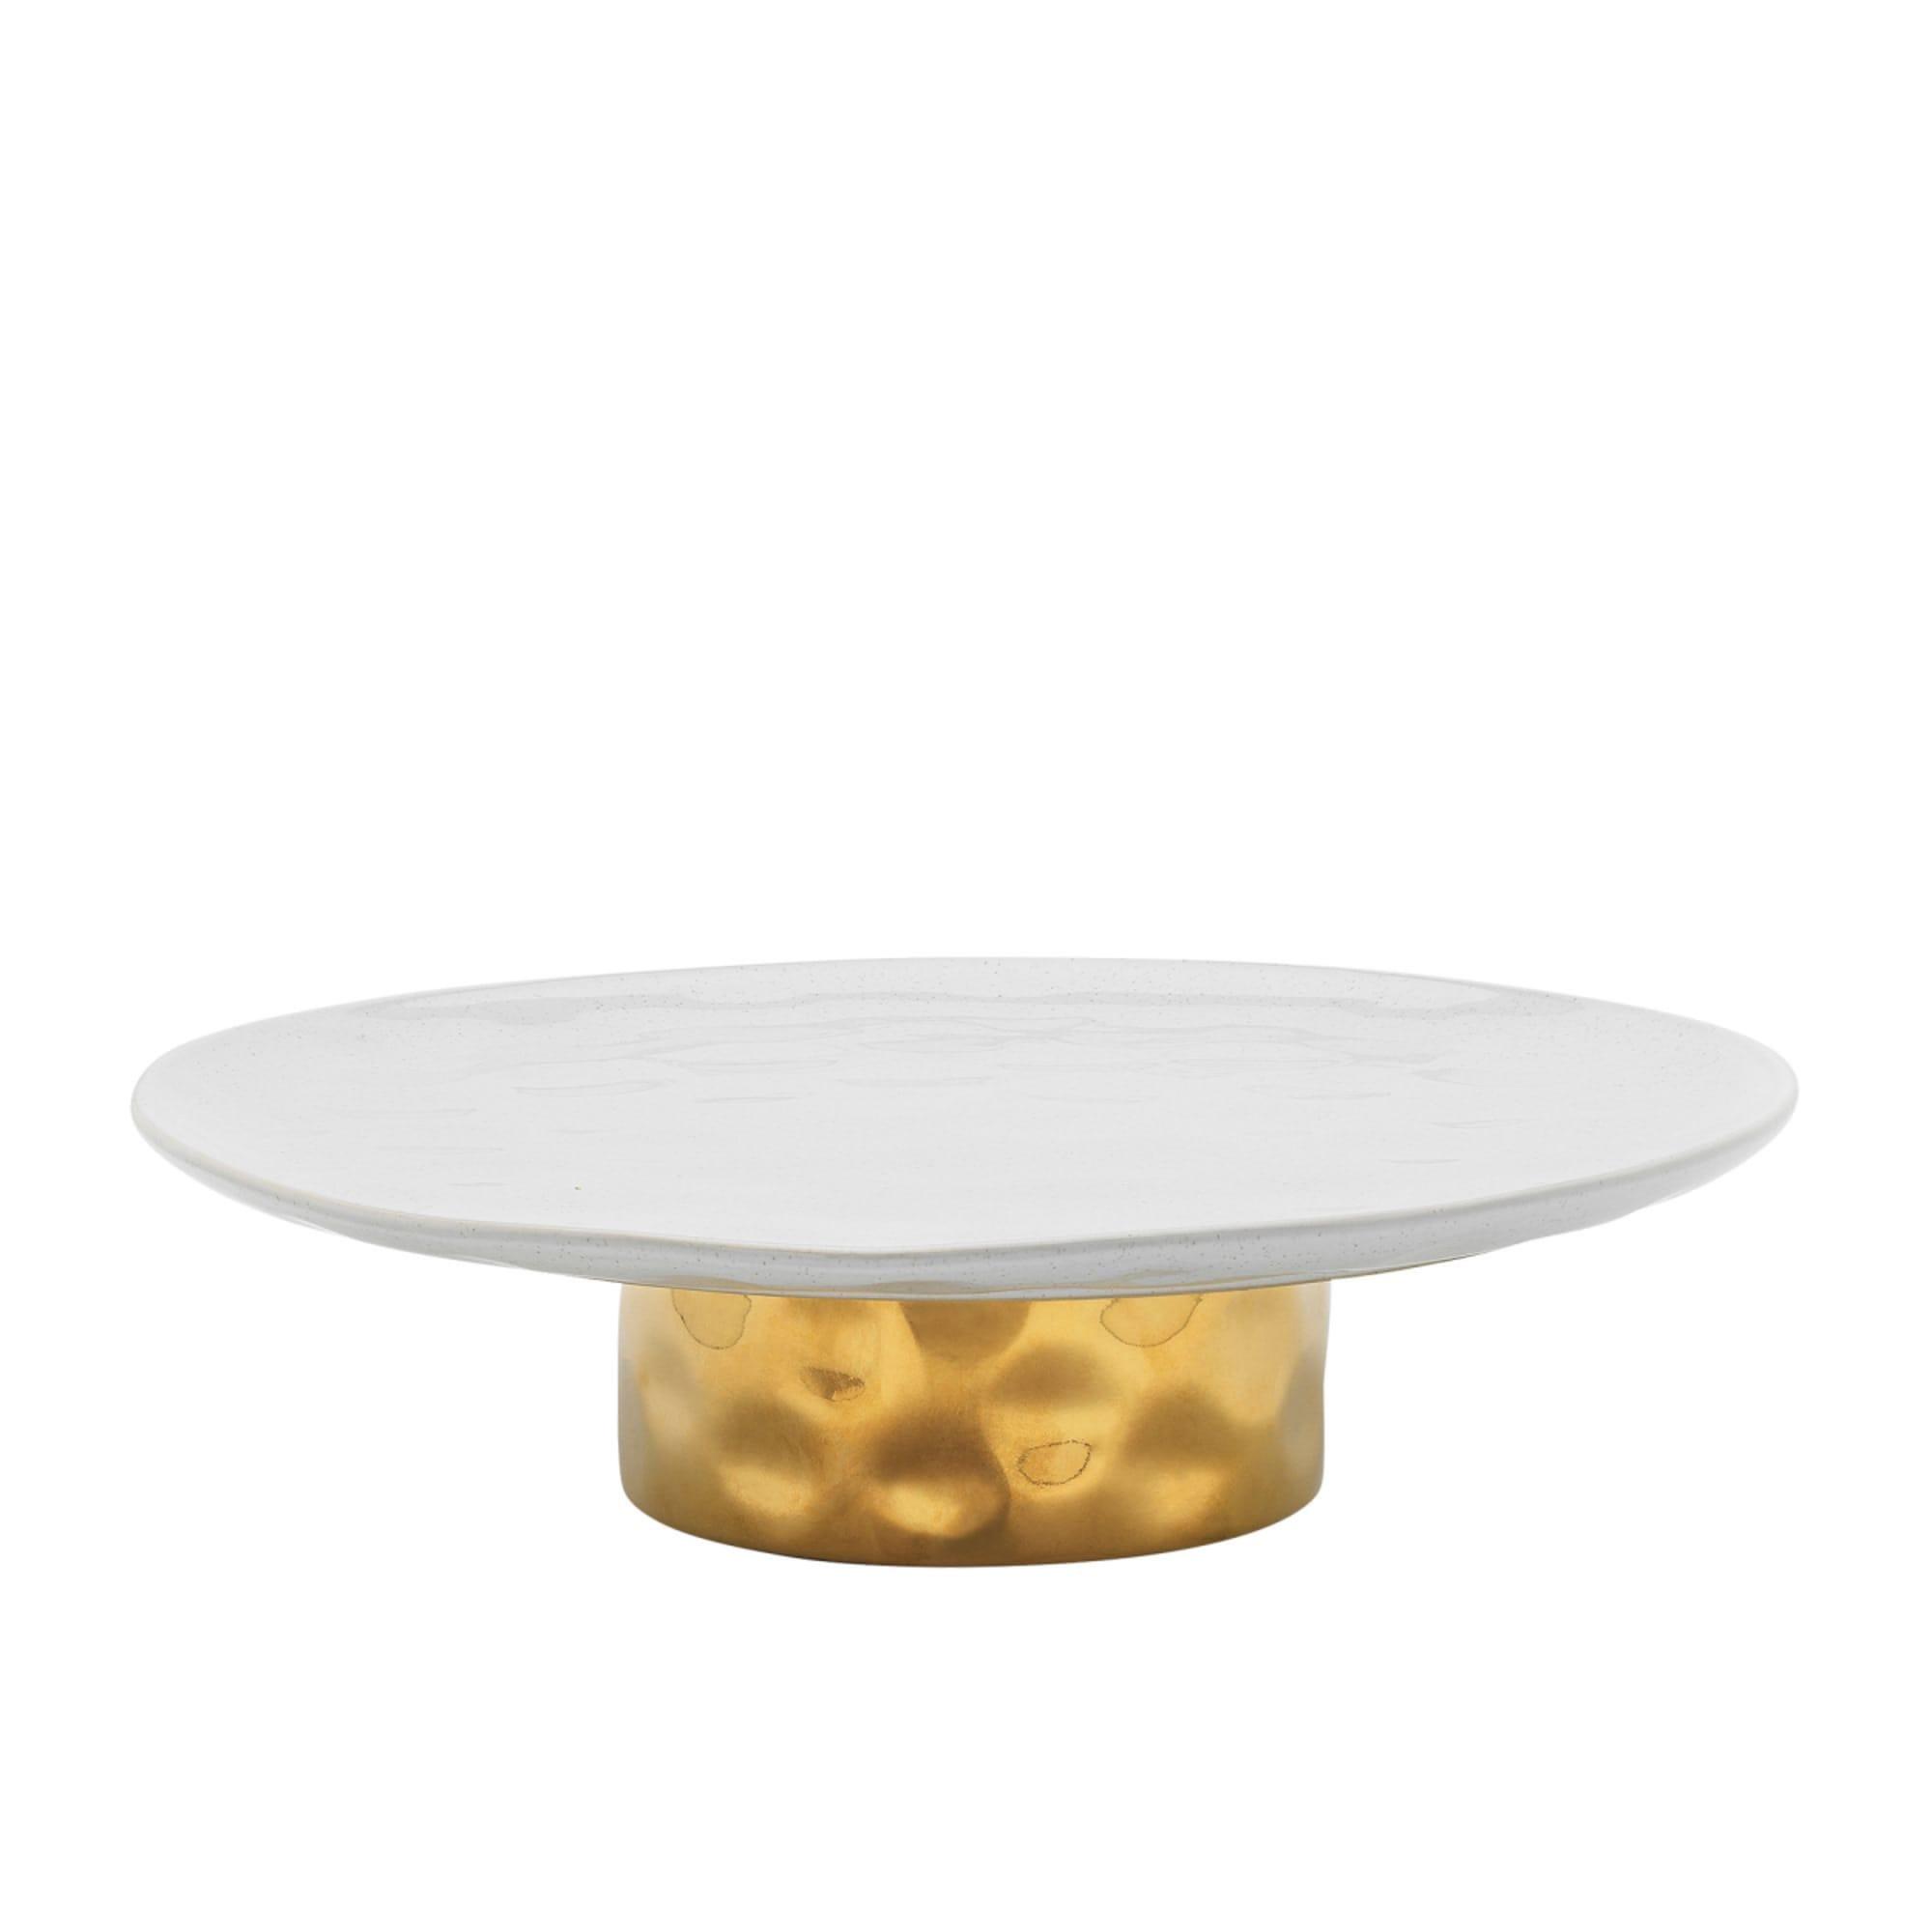 Ecology Speckle Footed Cake Stand 32cm Milk and Gold Image 1